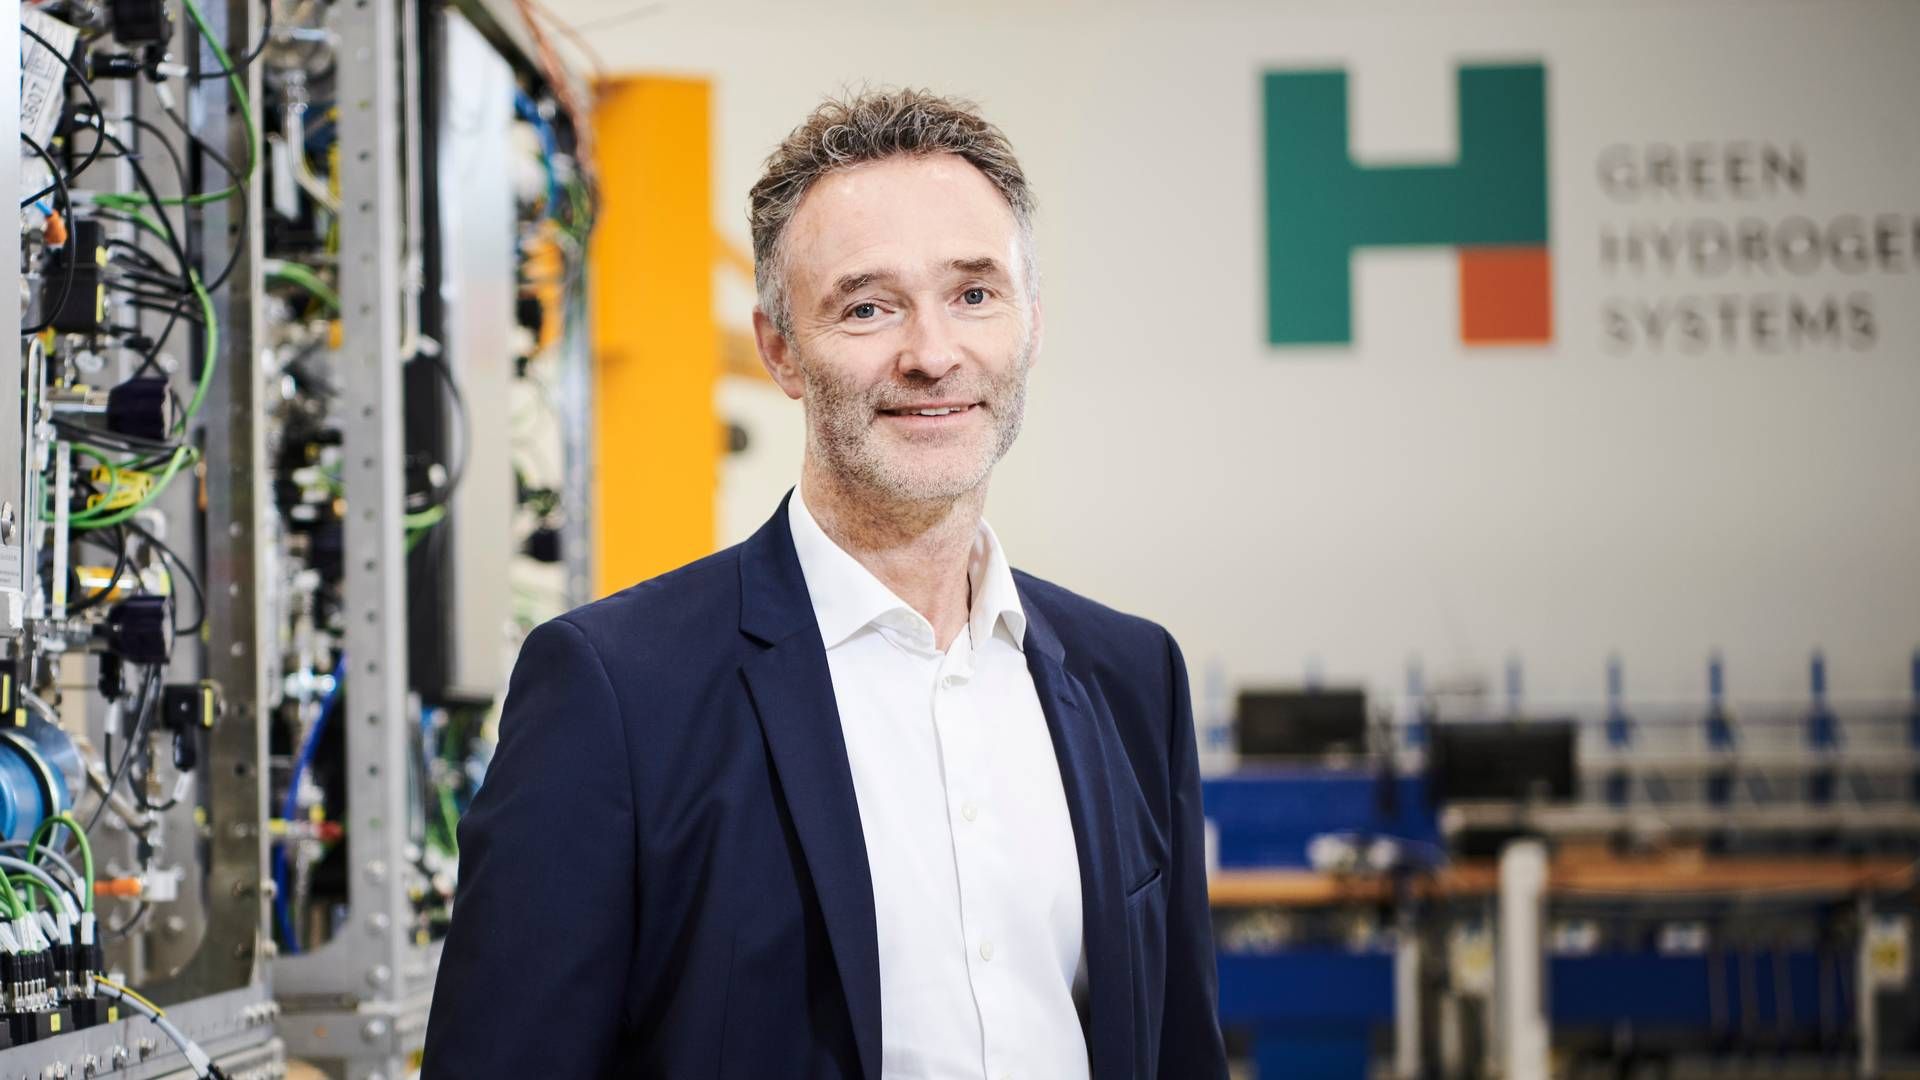 Peter Friis is the new CEO of Green Hydrogen Systems. | Photo: PR/Green Hydrogen Systems